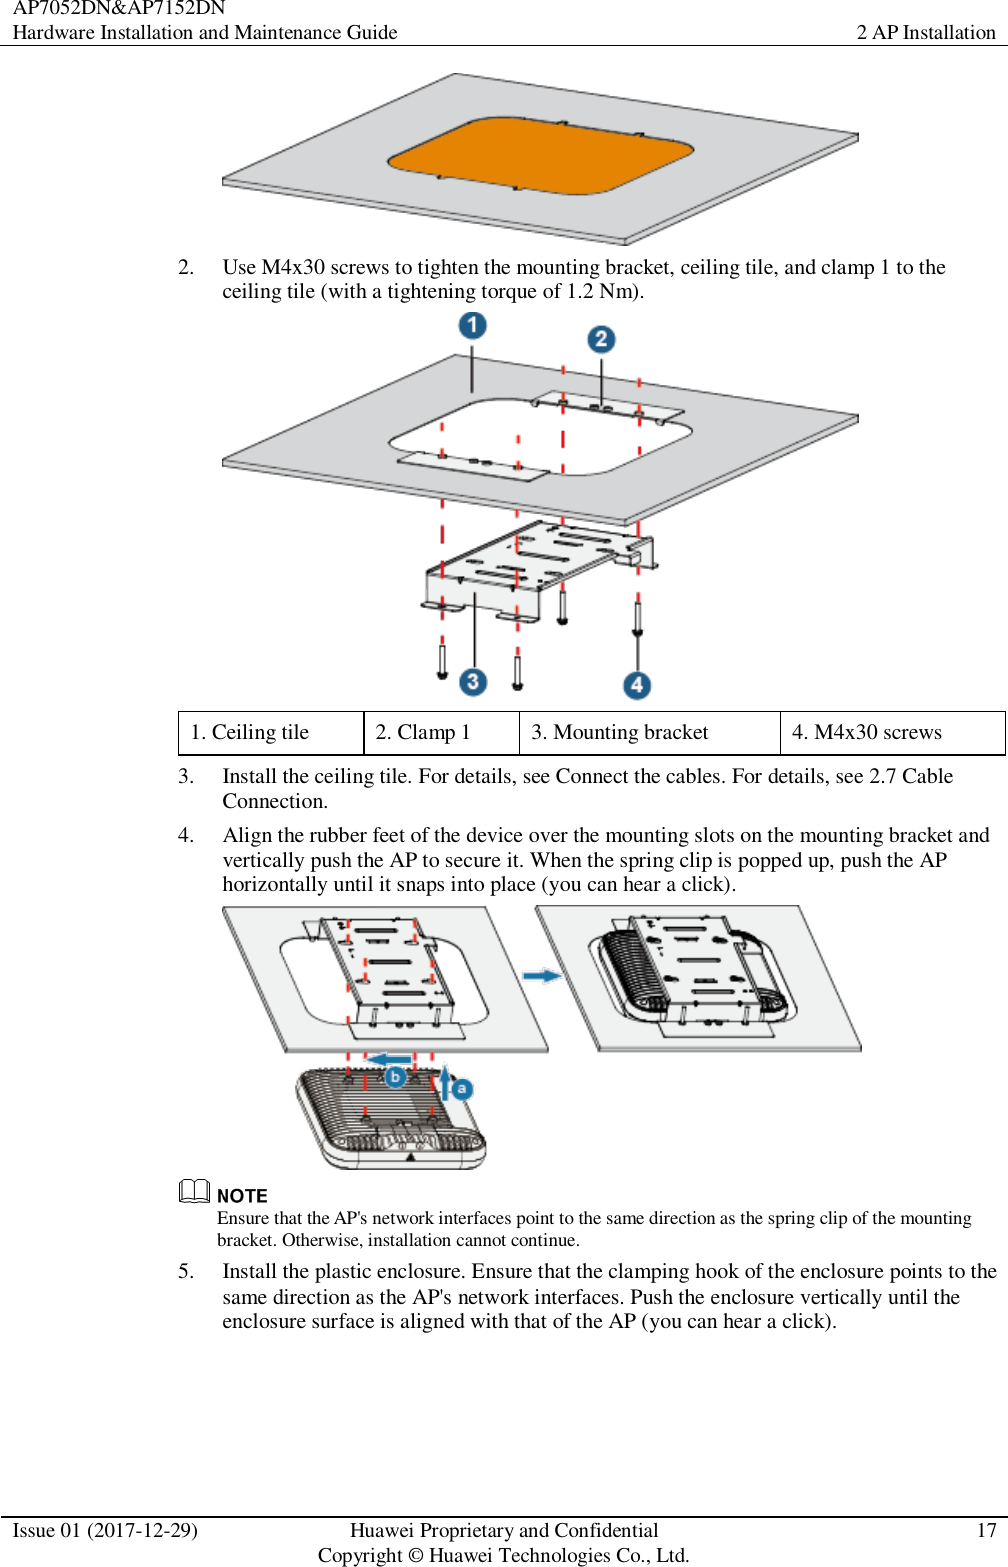 AP7052DN&amp;AP7152DN Hardware Installation and Maintenance Guide 2 AP Installation  Issue 01 (2017-12-29) Huawei Proprietary and Confidential                                     Copyright © Huawei Technologies Co., Ltd. 17   2. Use M4x30 screws to tighten the mounting bracket, ceiling tile, and clamp 1 to the ceiling tile (with a tightening torque of 1.2 Nm).  1. Ceiling tile 2. Clamp 1 3. Mounting bracket 4. M4x30 screws 3. Install the ceiling tile. For details, see Connect the cables. For details, see 2.7 Cable Connection. 4. Align the rubber feet of the device over the mounting slots on the mounting bracket and vertically push the AP to secure it. When the spring clip is popped up, push the AP horizontally until it snaps into place (you can hear a click).   Ensure that the AP&apos;s network interfaces point to the same direction as the spring clip of the mounting bracket. Otherwise, installation cannot continue. 5. Install the plastic enclosure. Ensure that the clamping hook of the enclosure points to the same direction as the AP&apos;s network interfaces. Push the enclosure vertically until the enclosure surface is aligned with that of the AP (you can hear a click). 